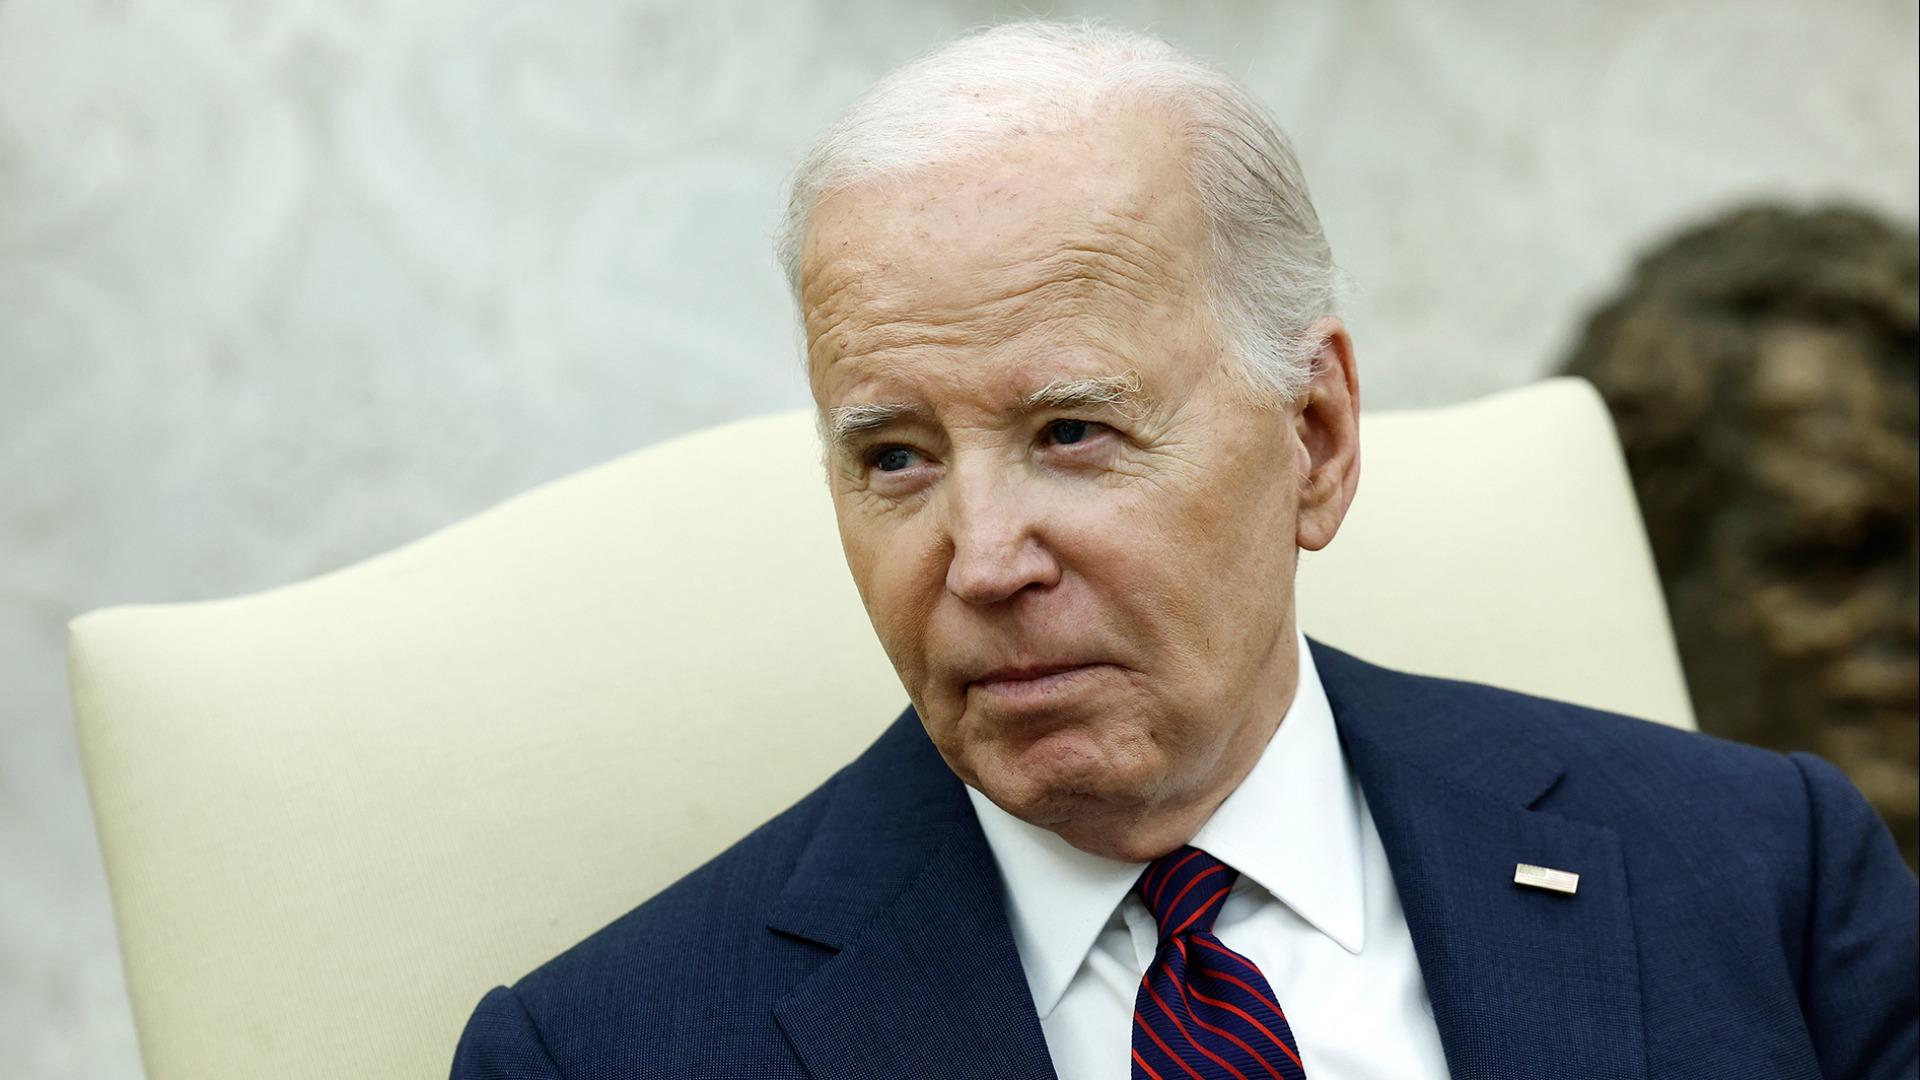 Biden campaign tries to keep Jan. 6 top of mind with voters. Will it work?